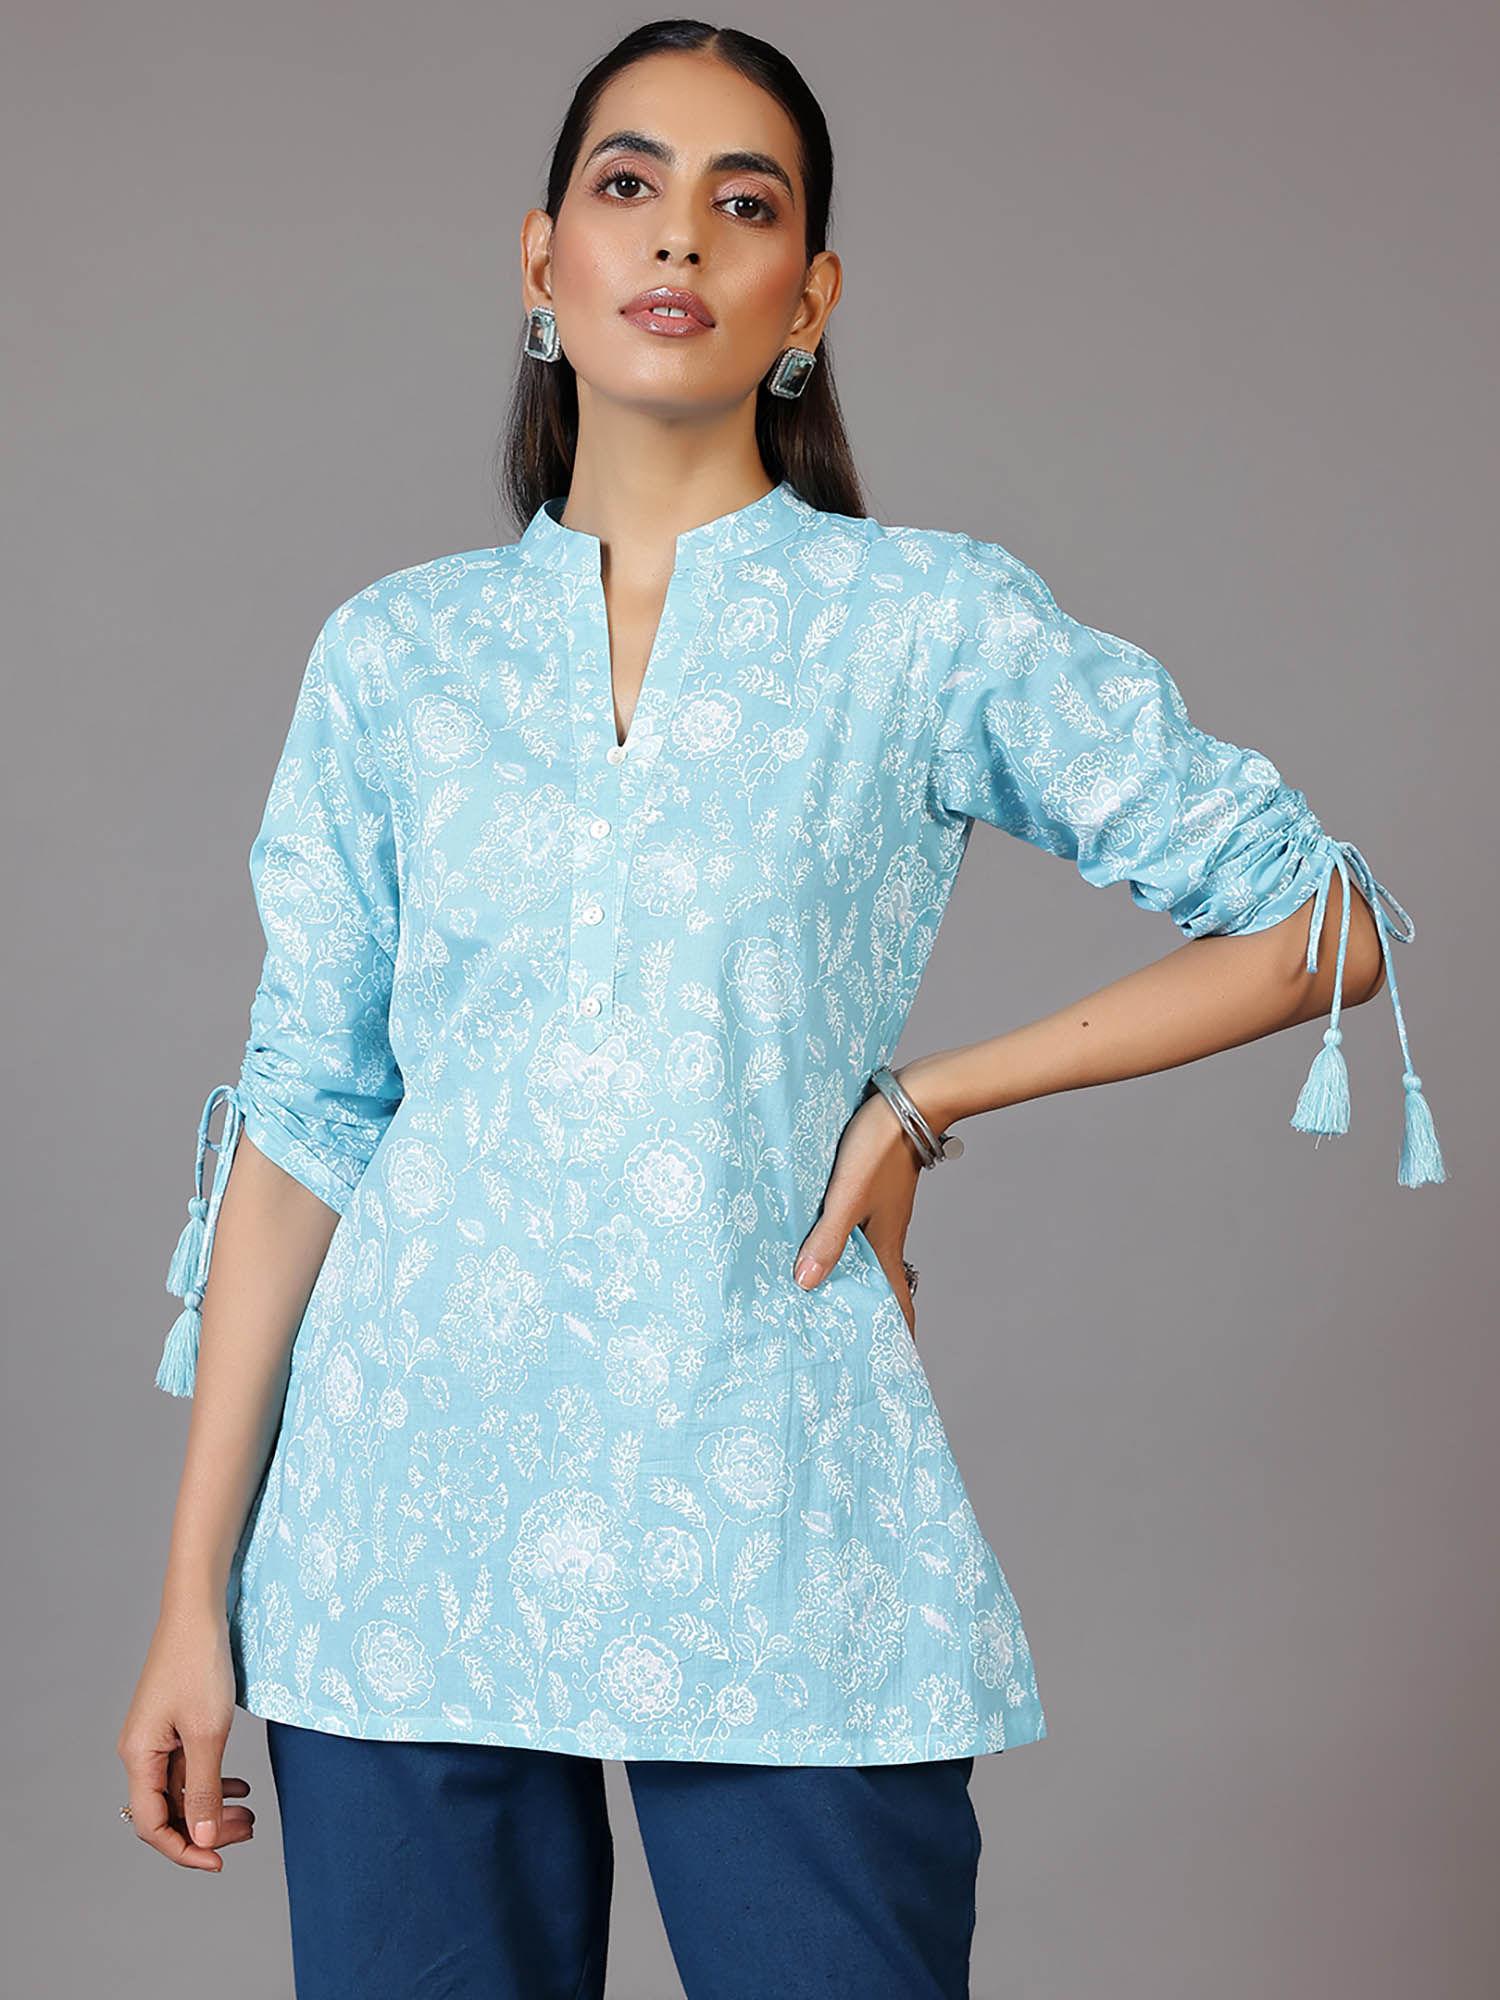 women floral printed blue kurti with a short button placket